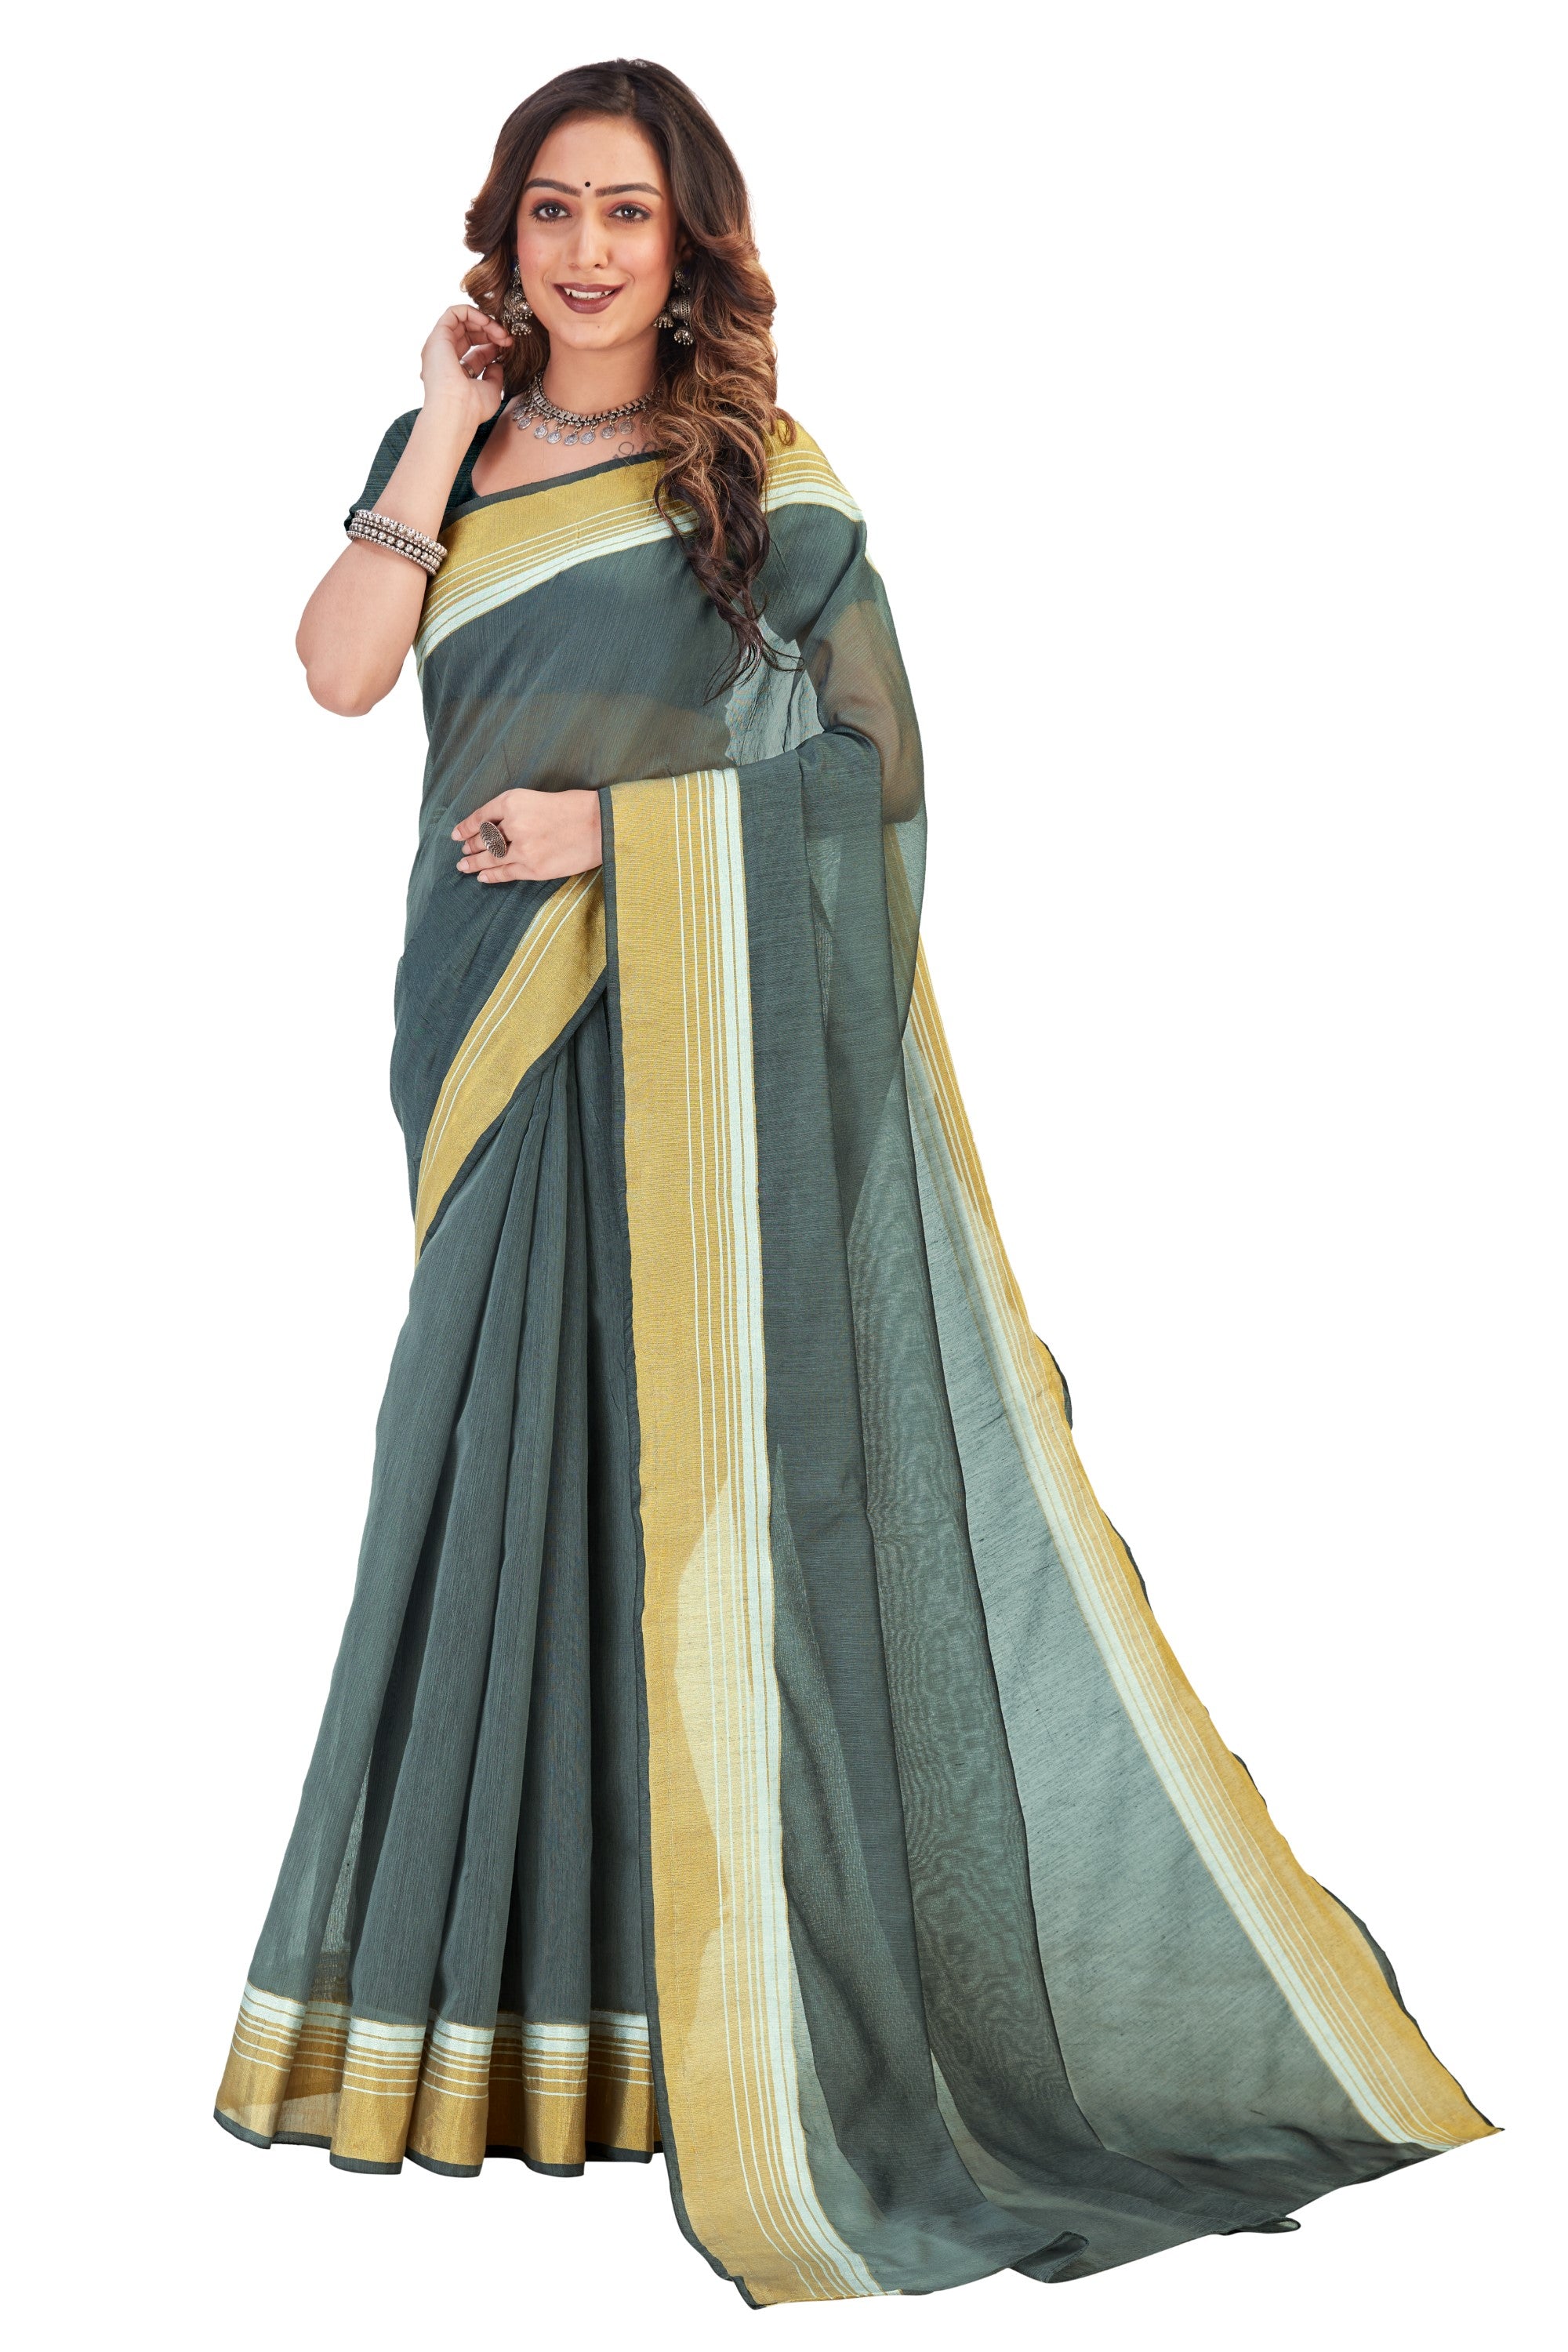 Women's self Woven Solid Daily Wear Cotton Blend Zari Border Sari With Blouse Piece (Grey) - NIMIDHYA